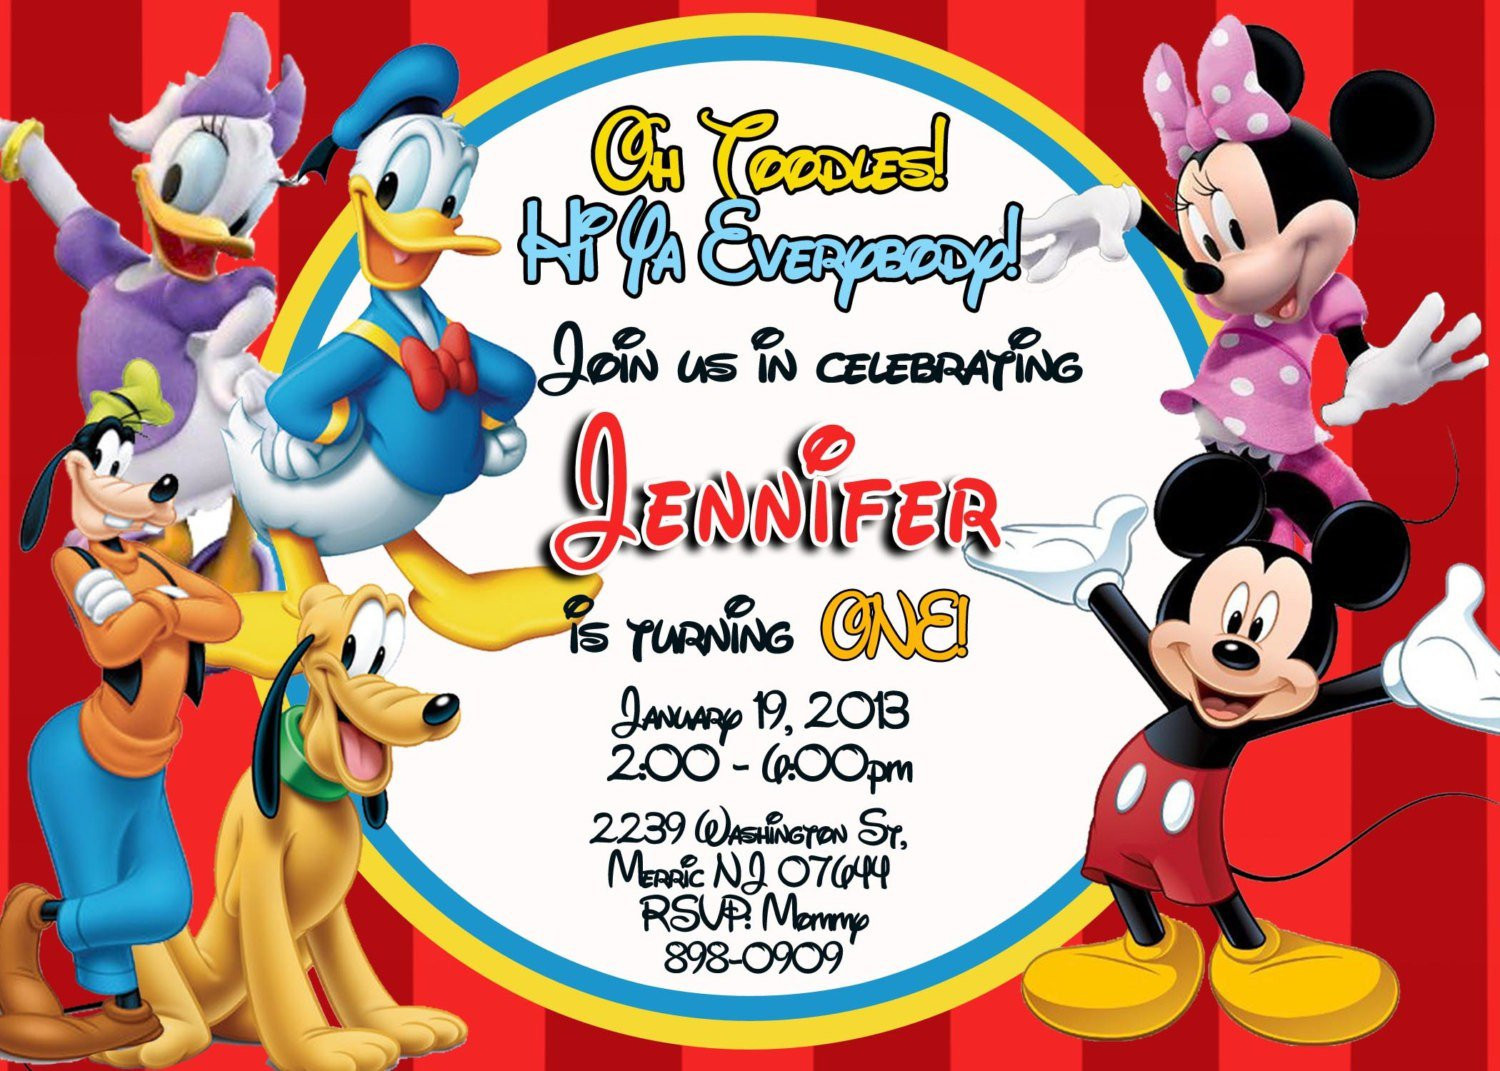 Mickey Mouse Clubhouse Birthday Party Invitations
 Exclusive Mickey Mouse Clubhouse Birthday Invitations